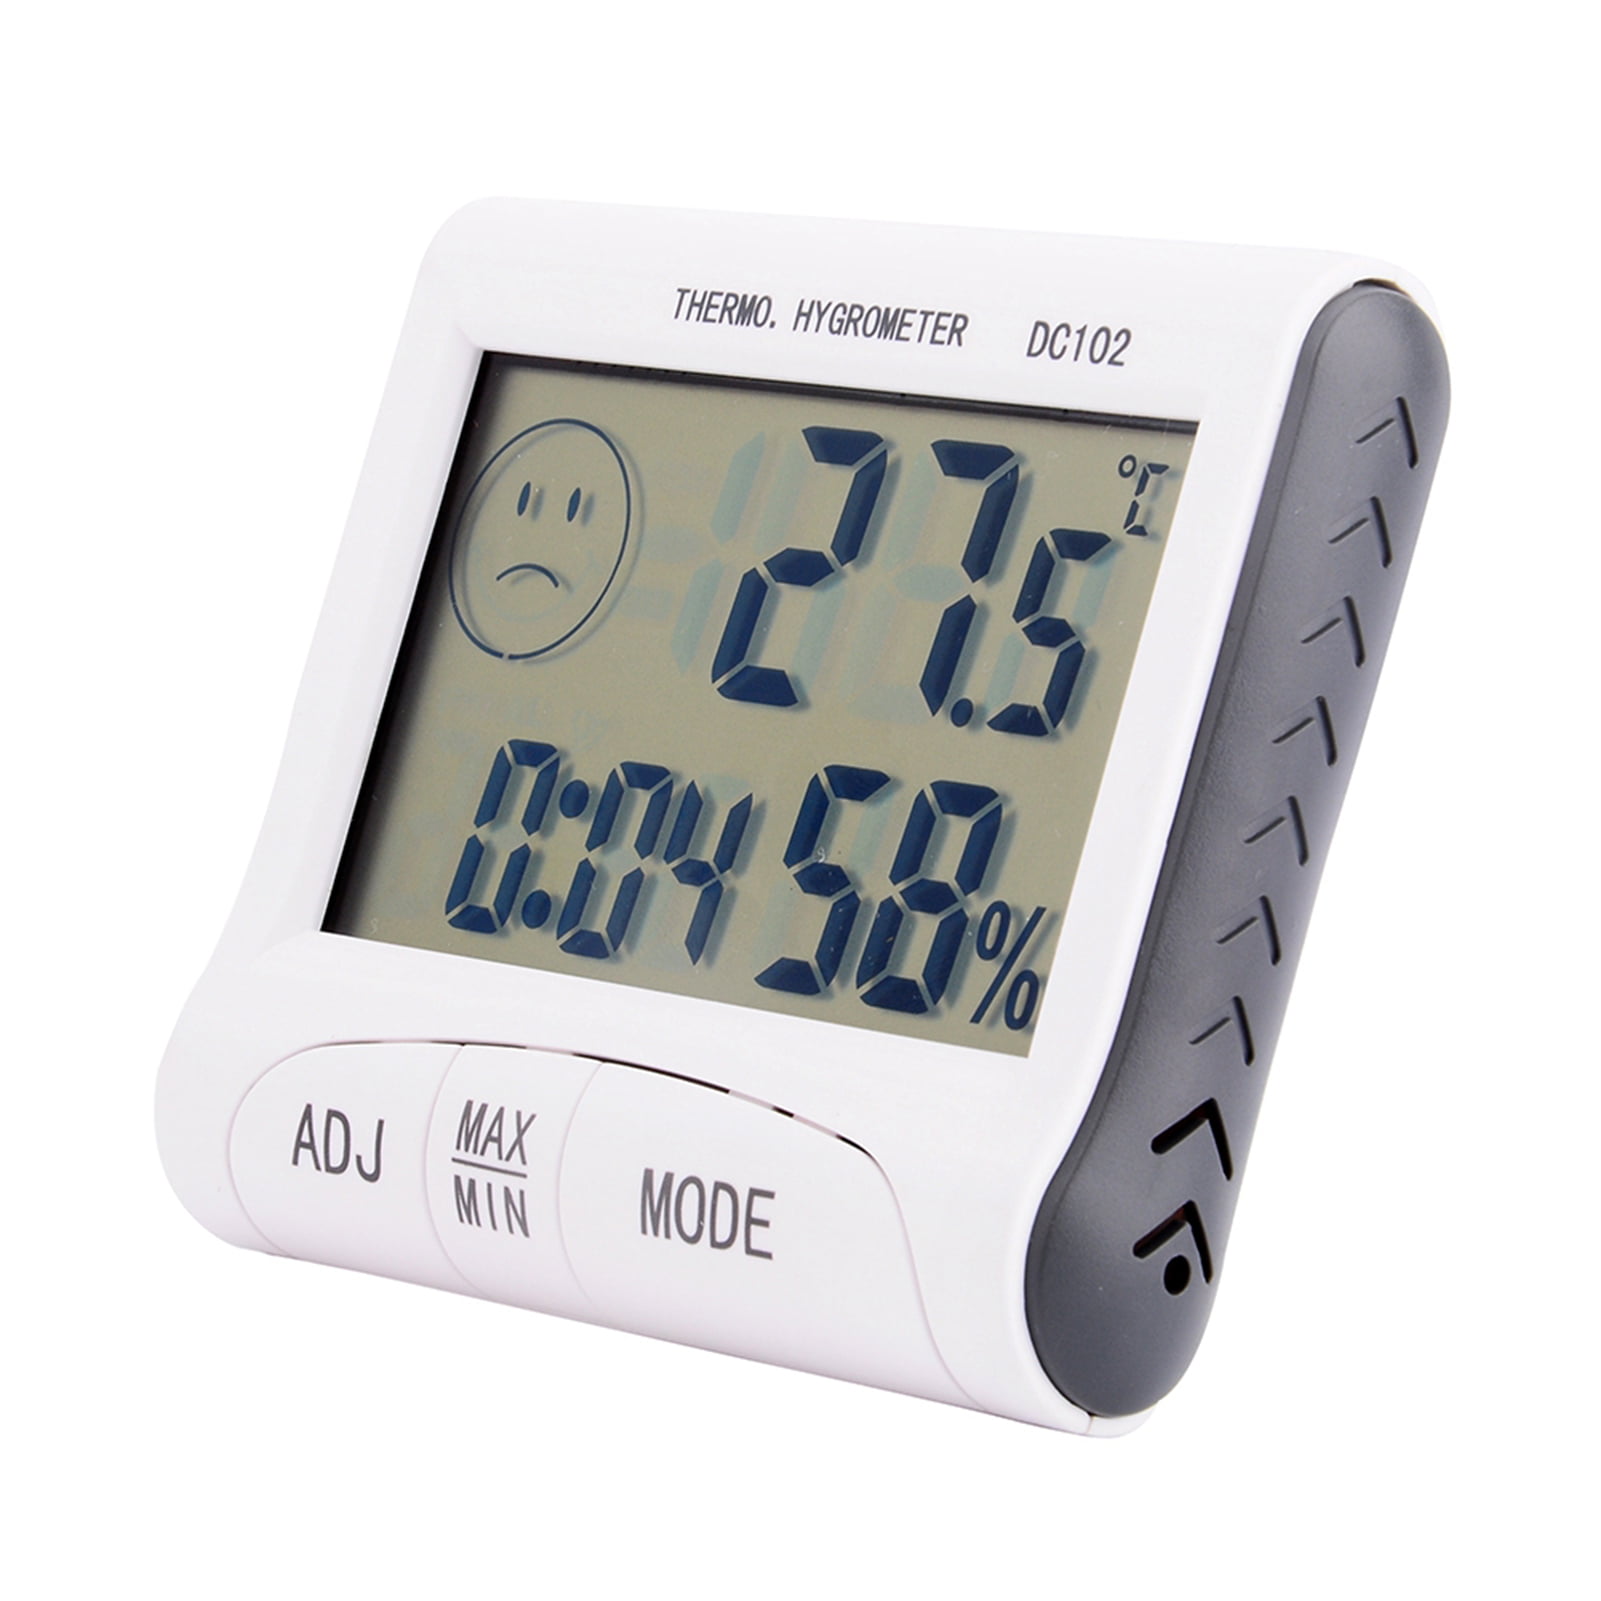 ThermoPro TP50 digitales Thermo-Hygrometer Innen Thermometer Hygrometer Temperat 